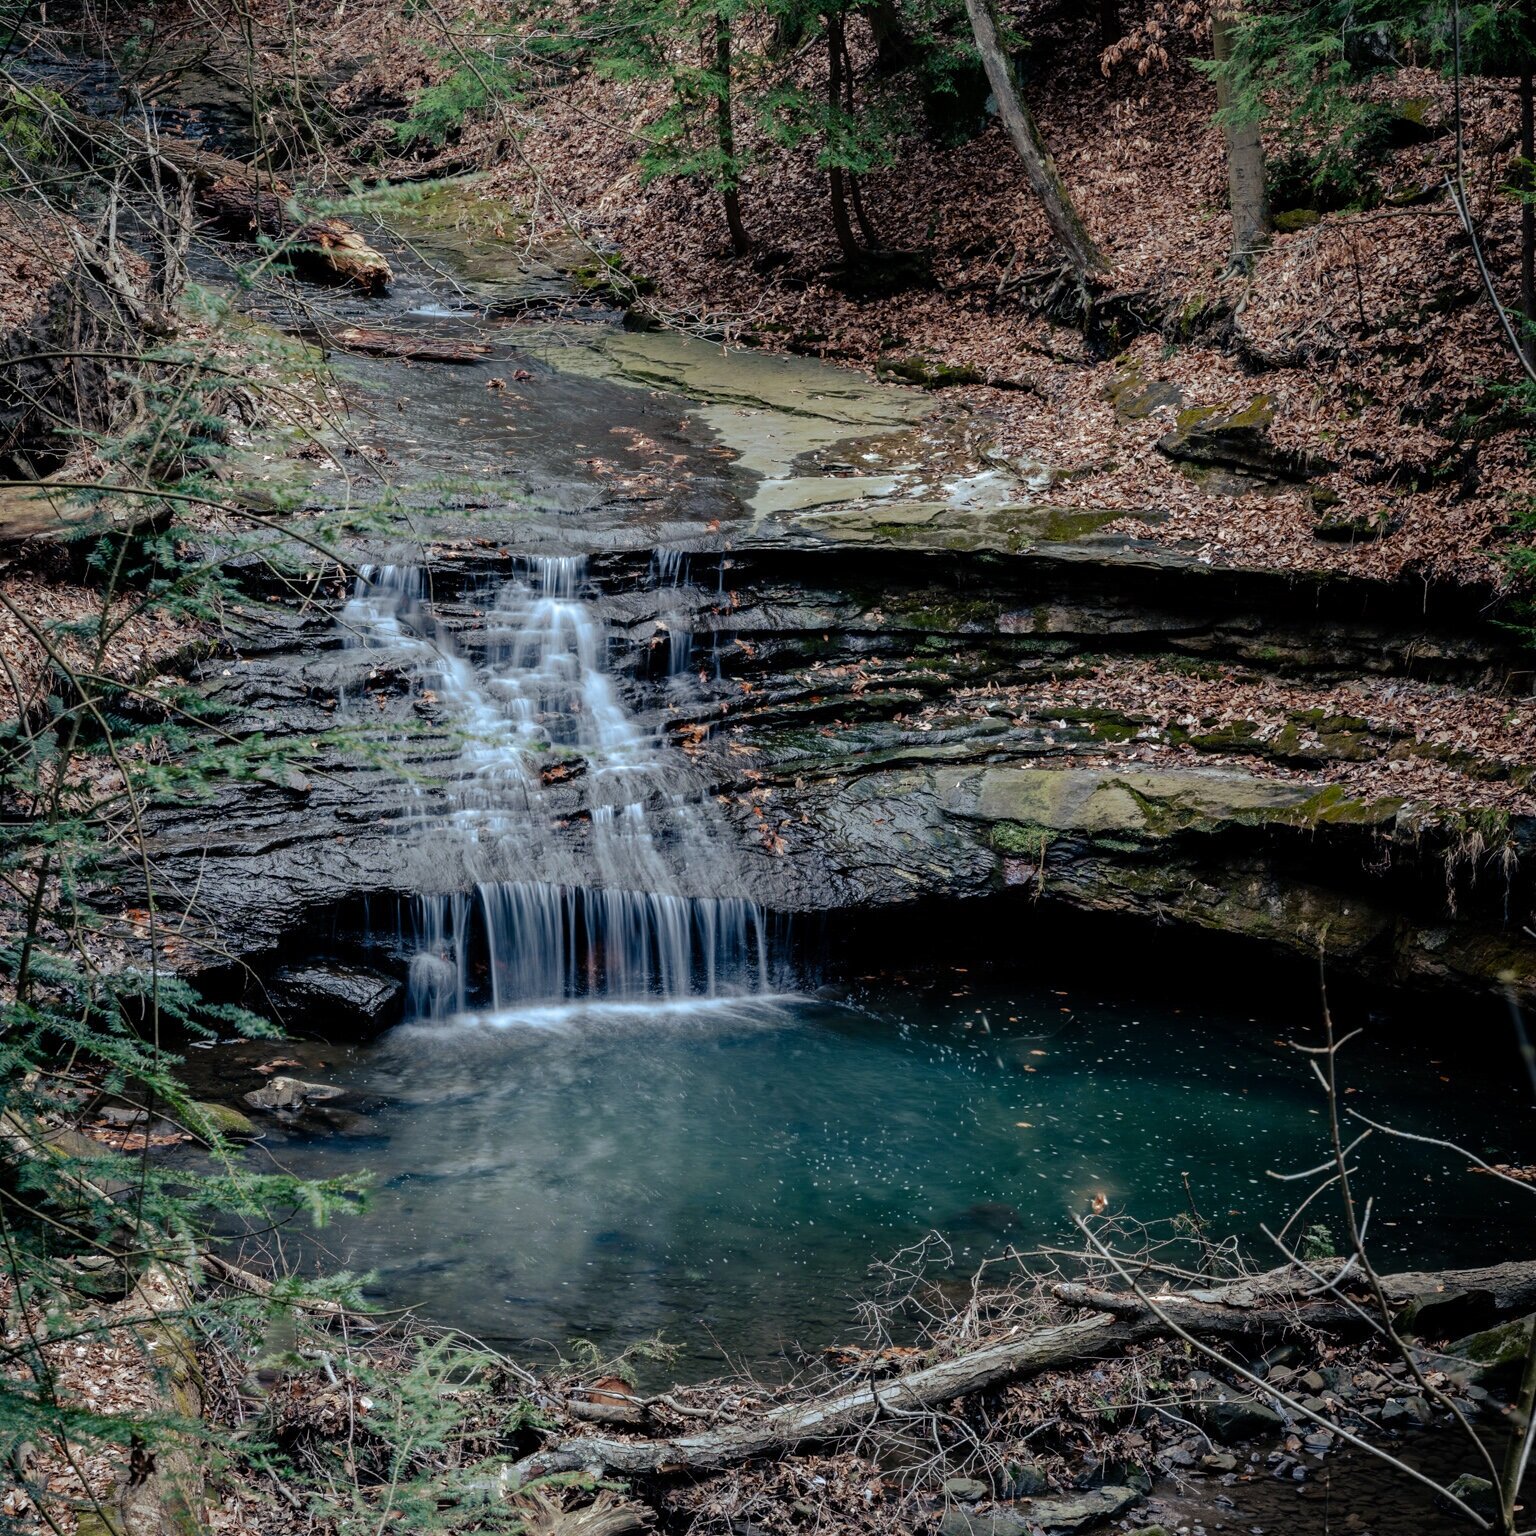 Hike to Cascade Gorge Natural Pool from Suspension Bridge - Mill Creek MetroParks